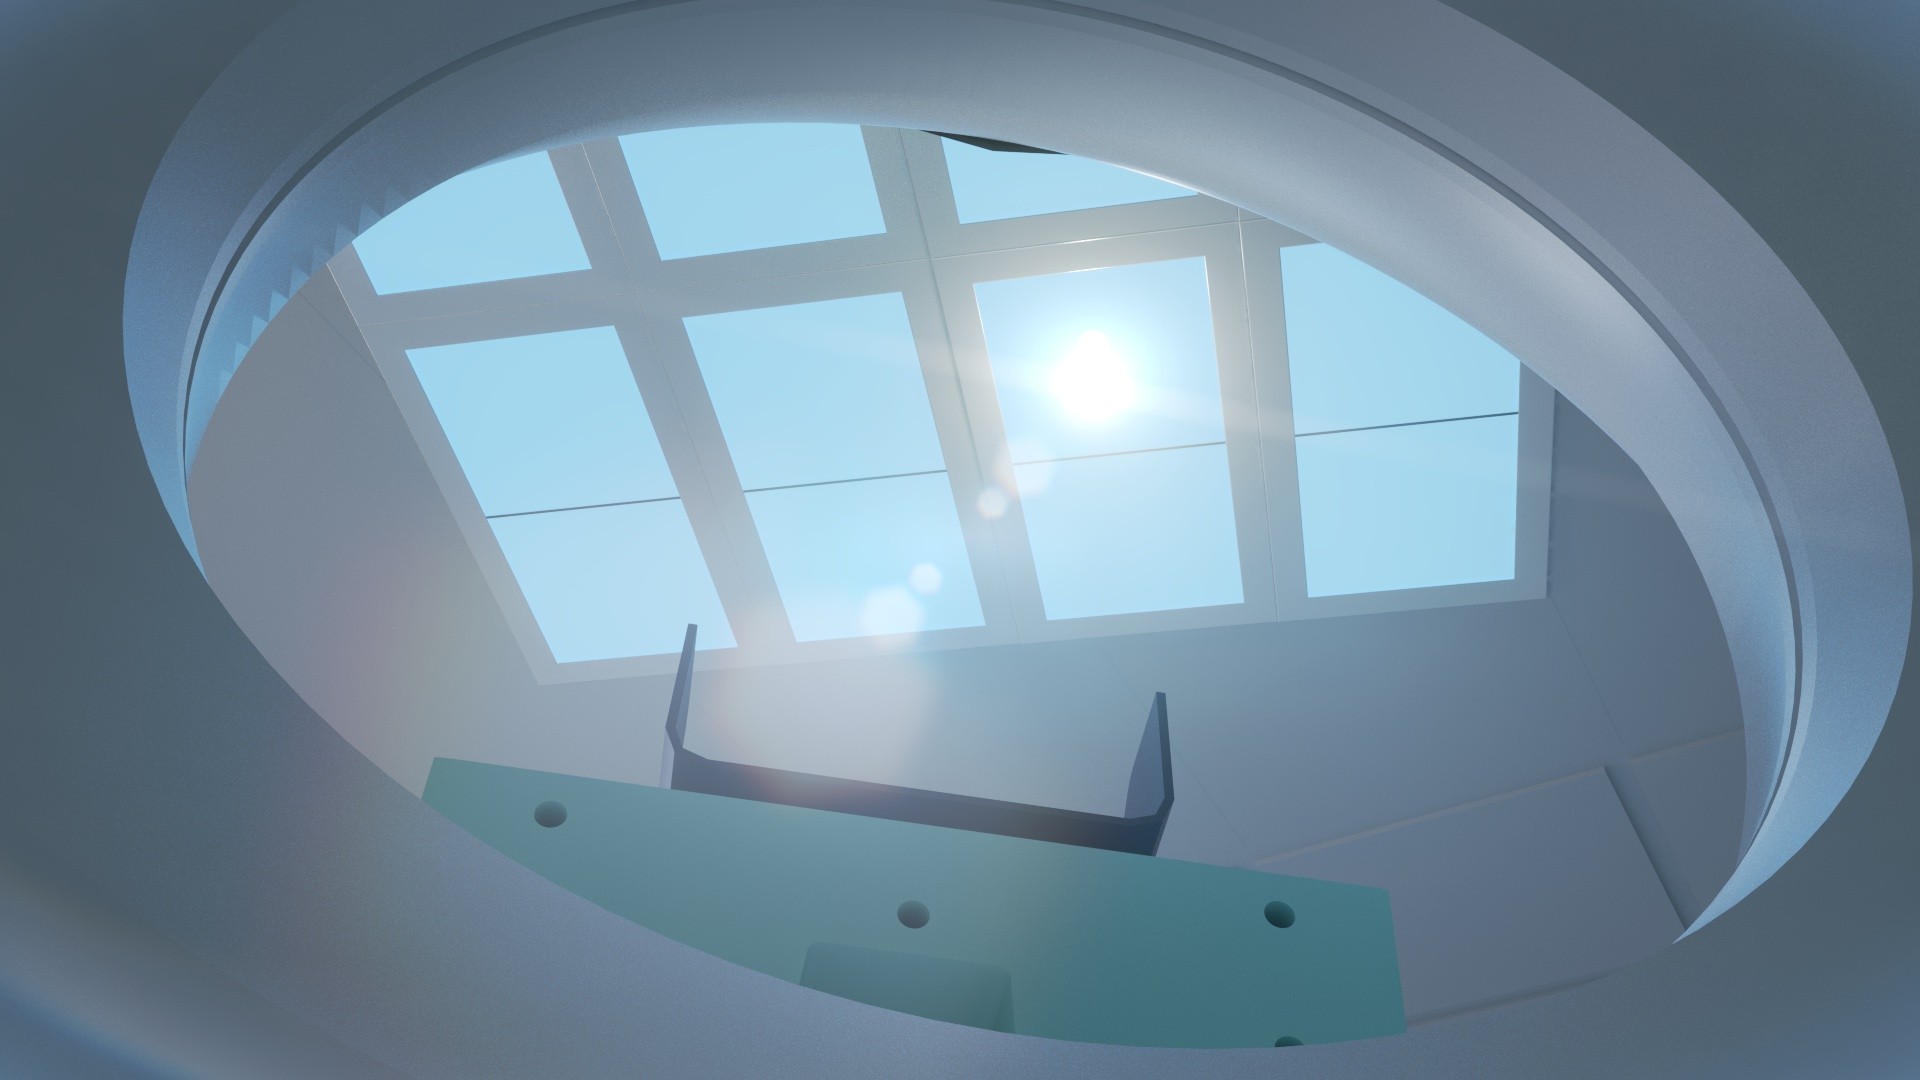 Innerscene Virtual Sun Model A7 aligned with CT scan bed from the perspective of the bed